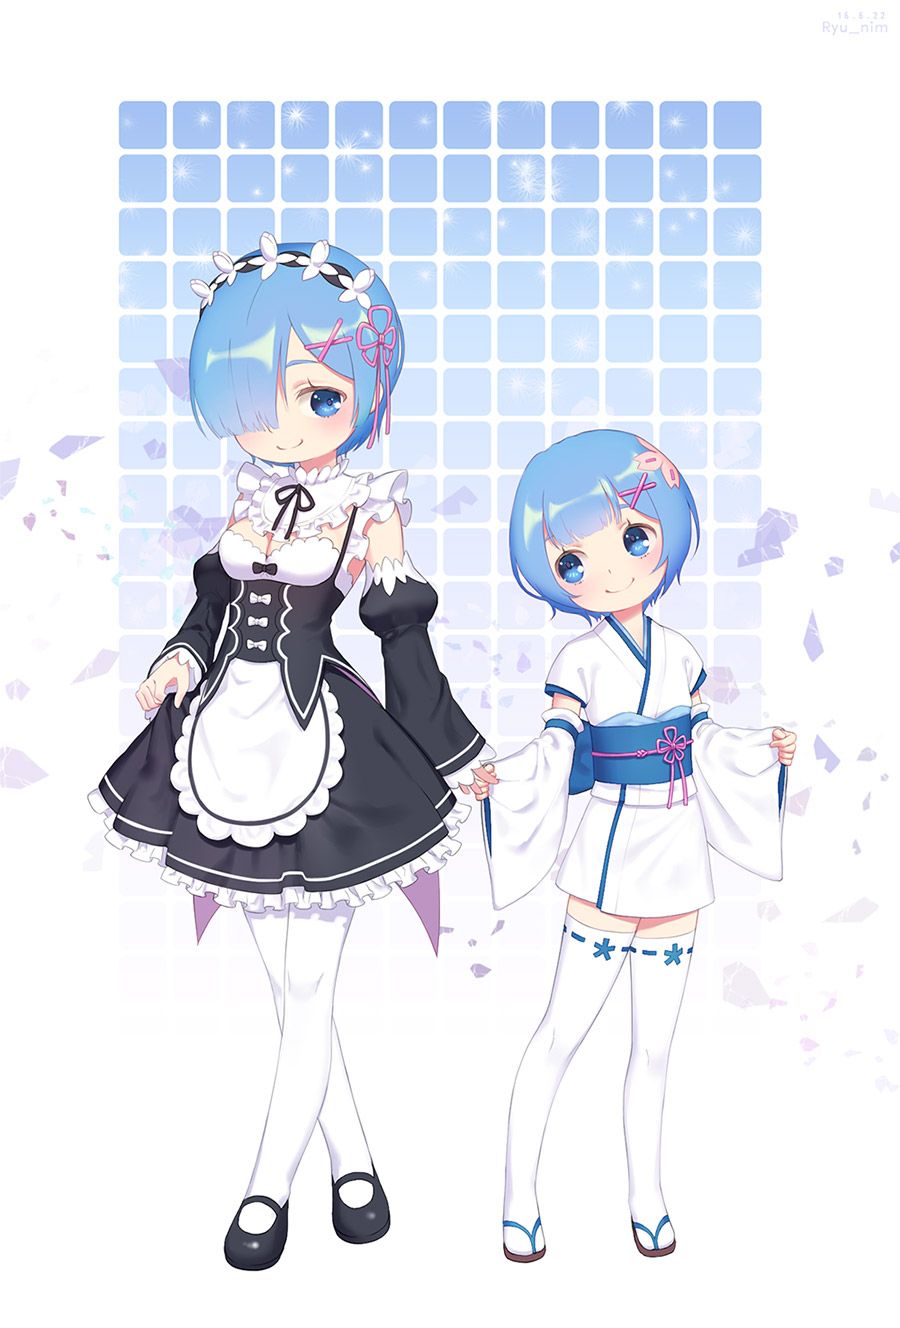 2D Re: less erotic image of REM Rin of different world life starting from zero [re-zero] 57 sheets 8